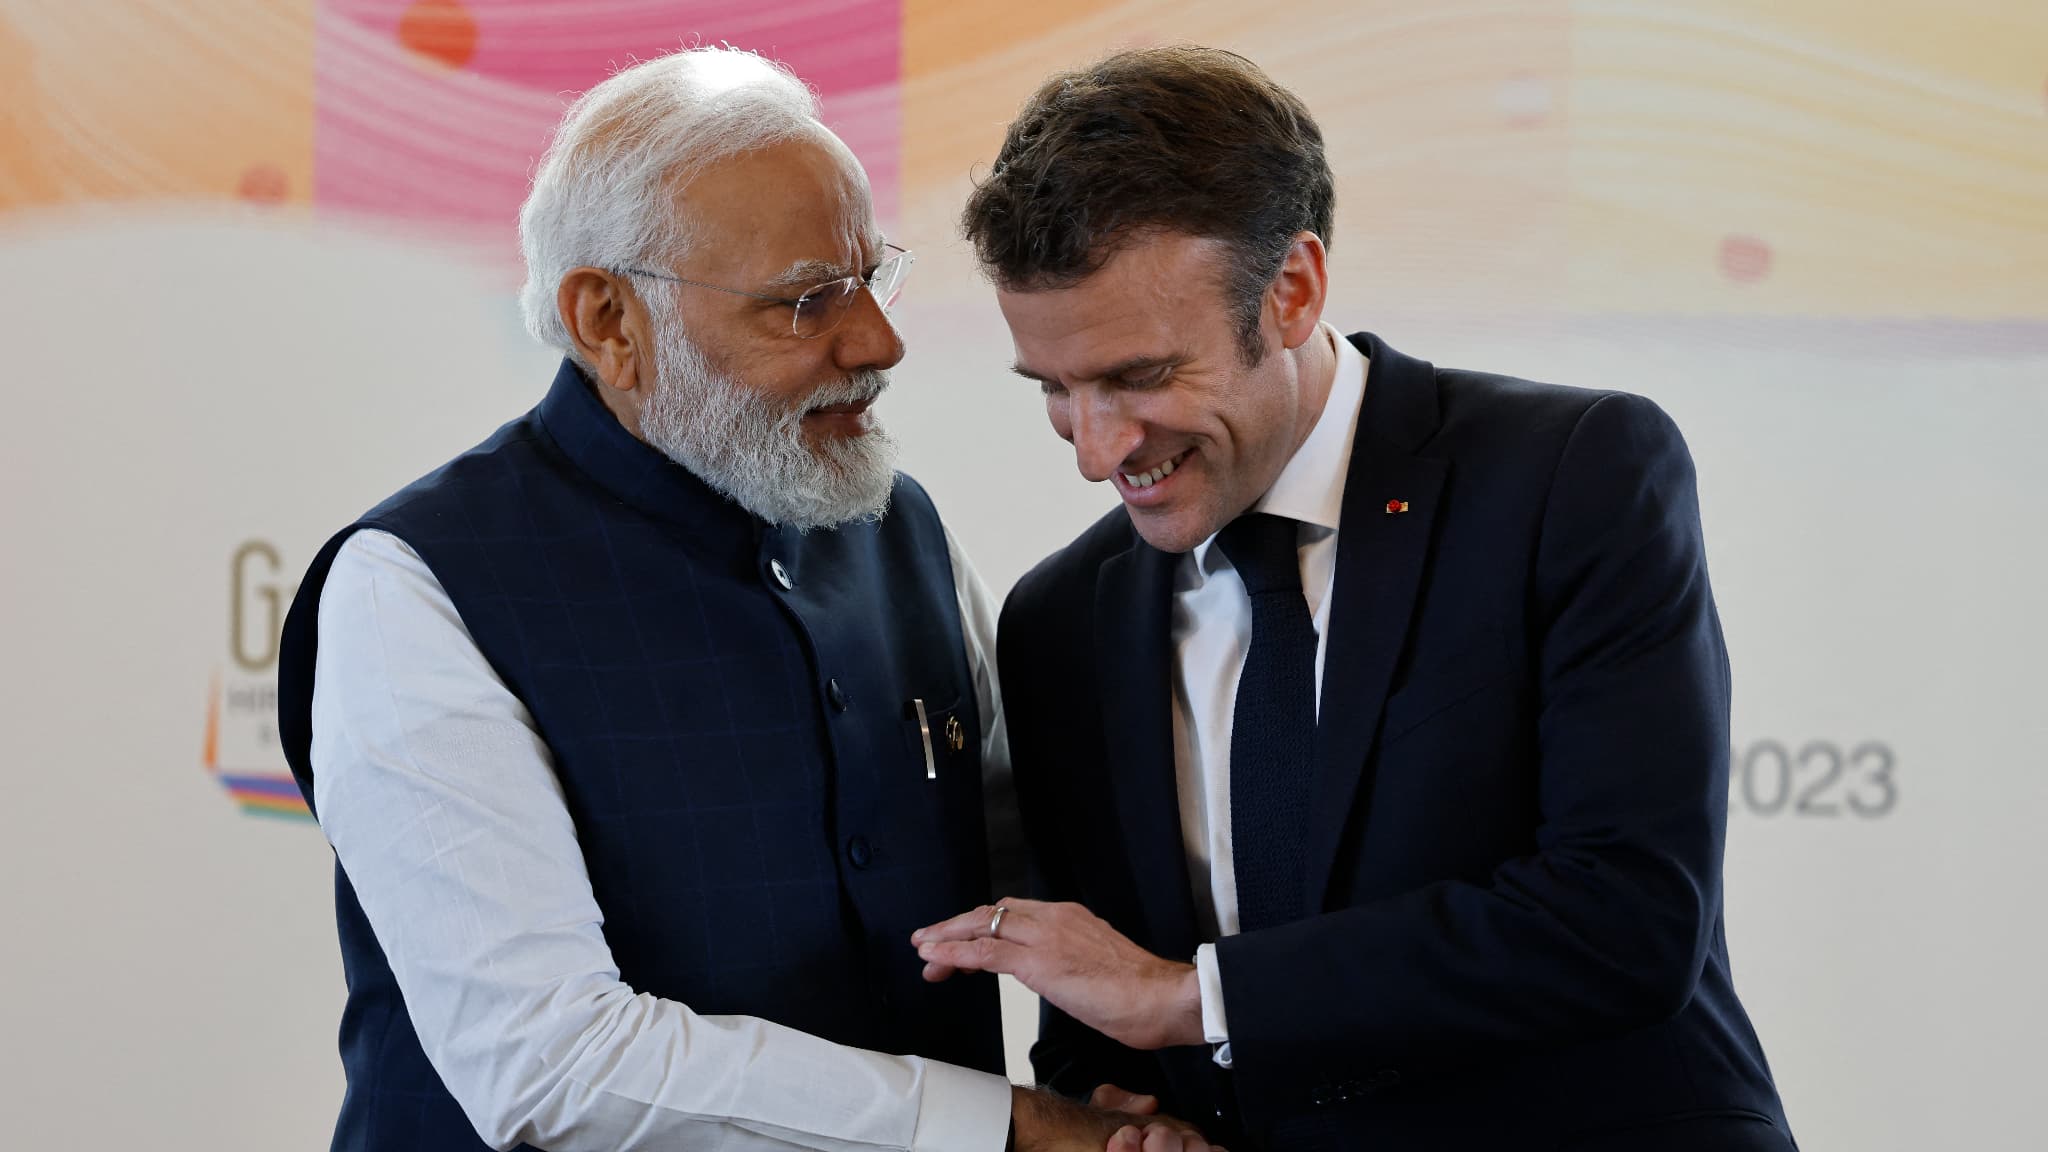 For the Indian Prime Minister, the partnership with France is very important